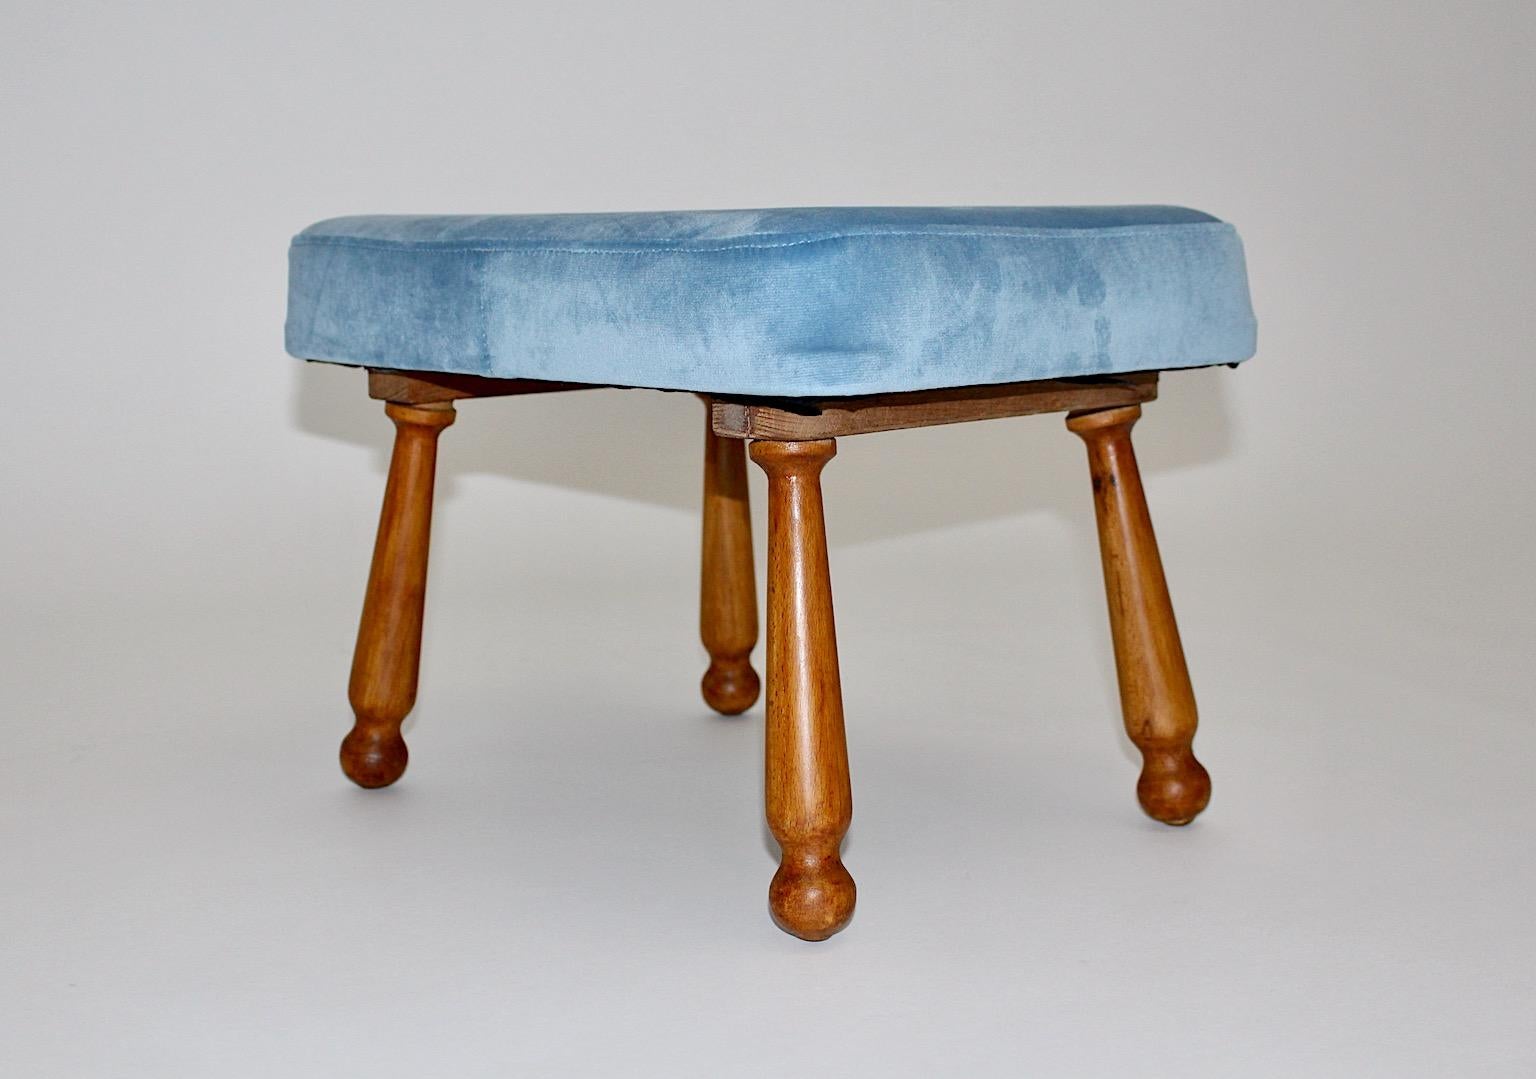 Mid Century Modern vintage rectangular like footstool from cherrywood with pastel blue velvet upholstery, Josef Frank style, 1950s Austria.
A stunning footstool new covered with pastel blue velvet fabric from honey brown cherrywood. While the